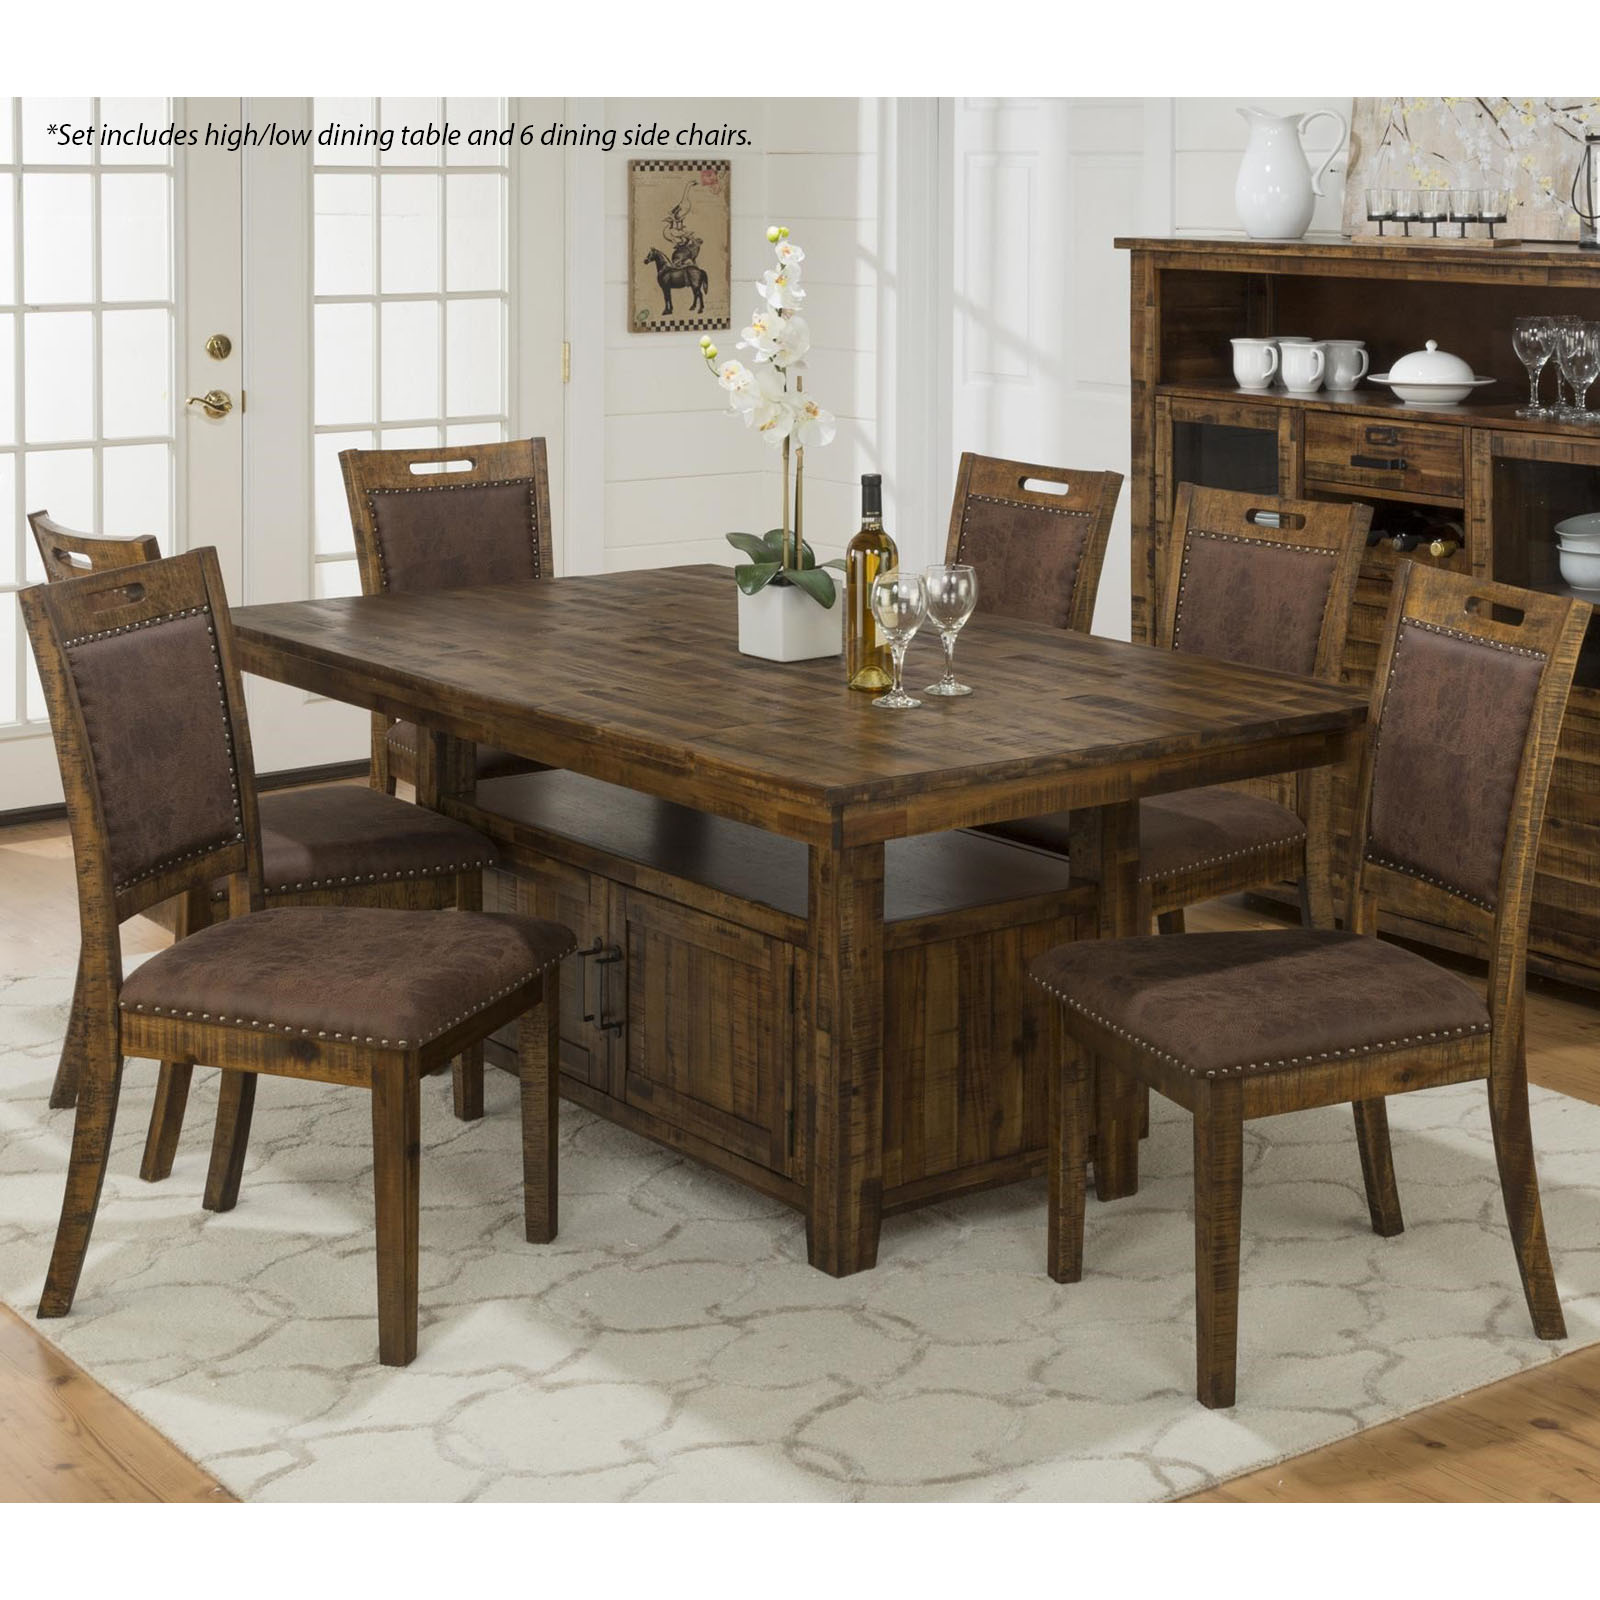 Jofran Cannon Valley Storage Dining Table & 6 Side Chairs